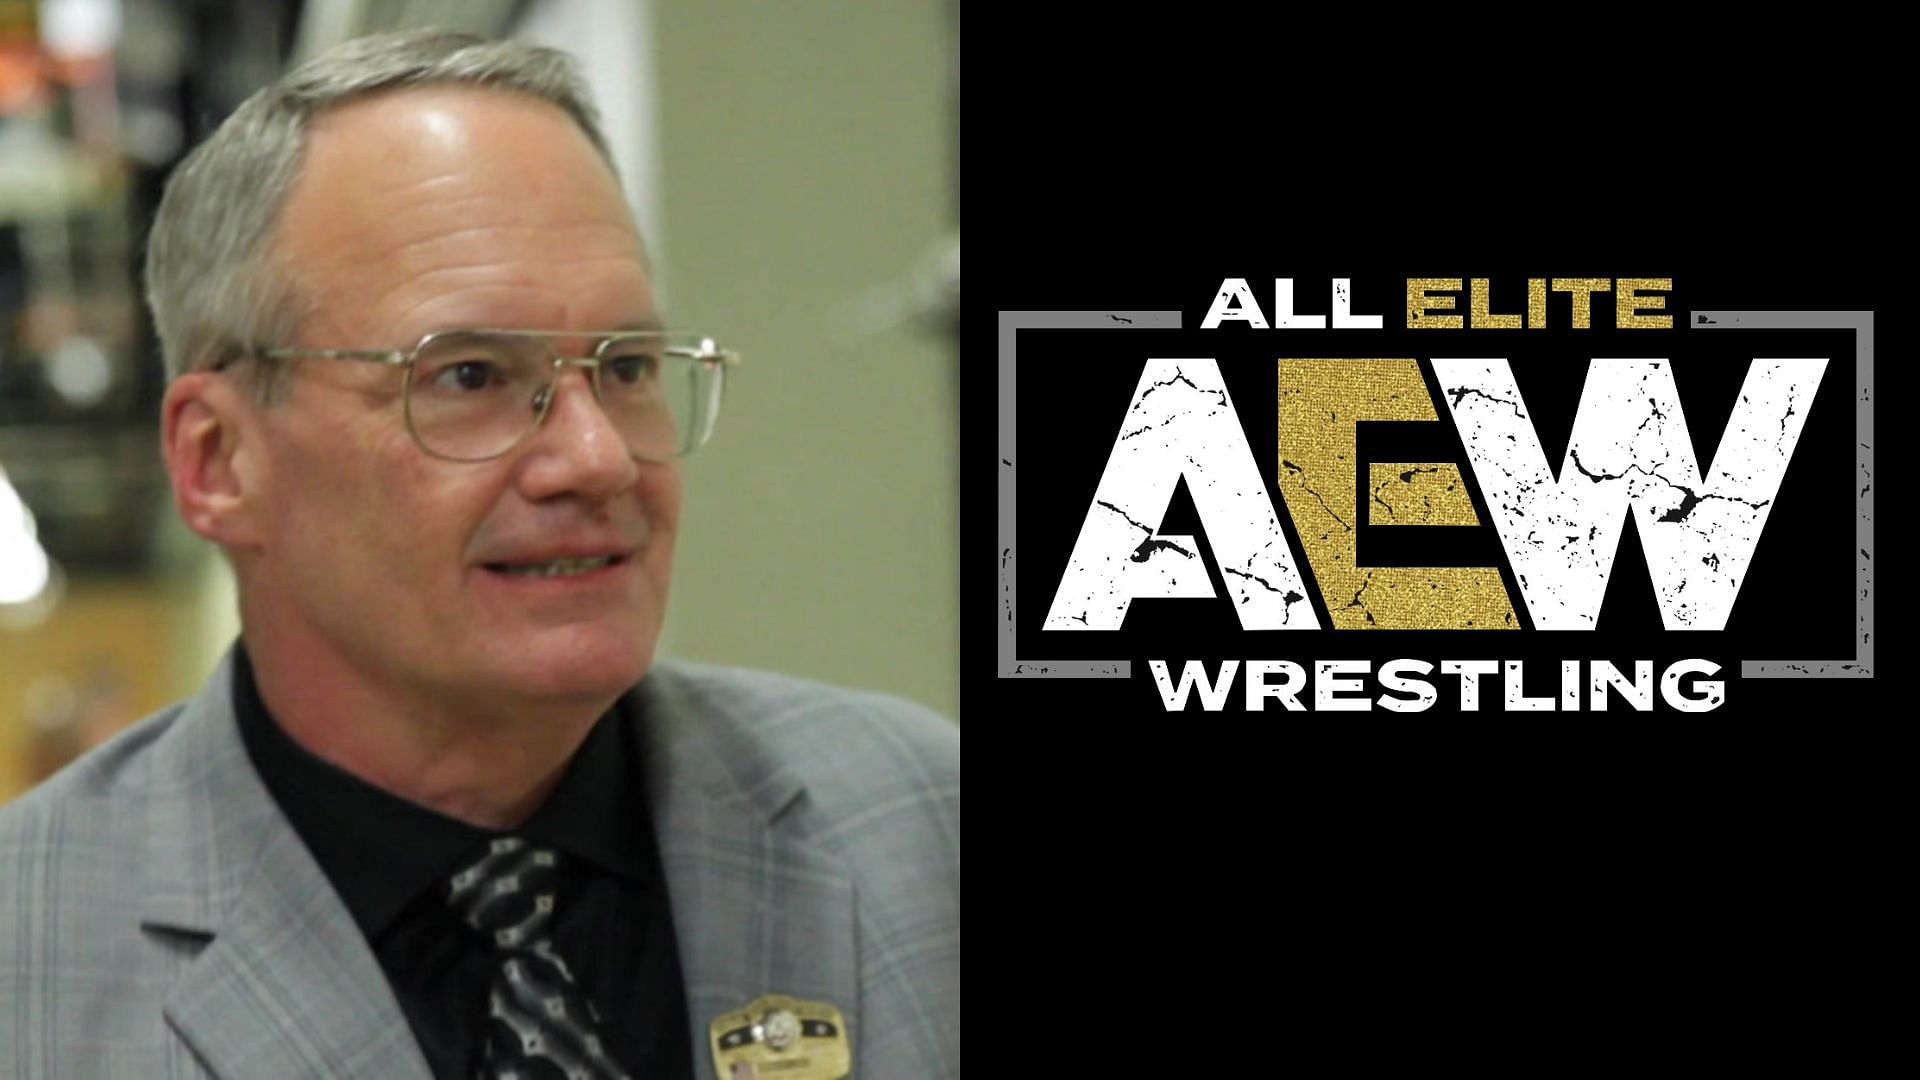 Has Jim Cornette made a startling discovery about these AEW stars?